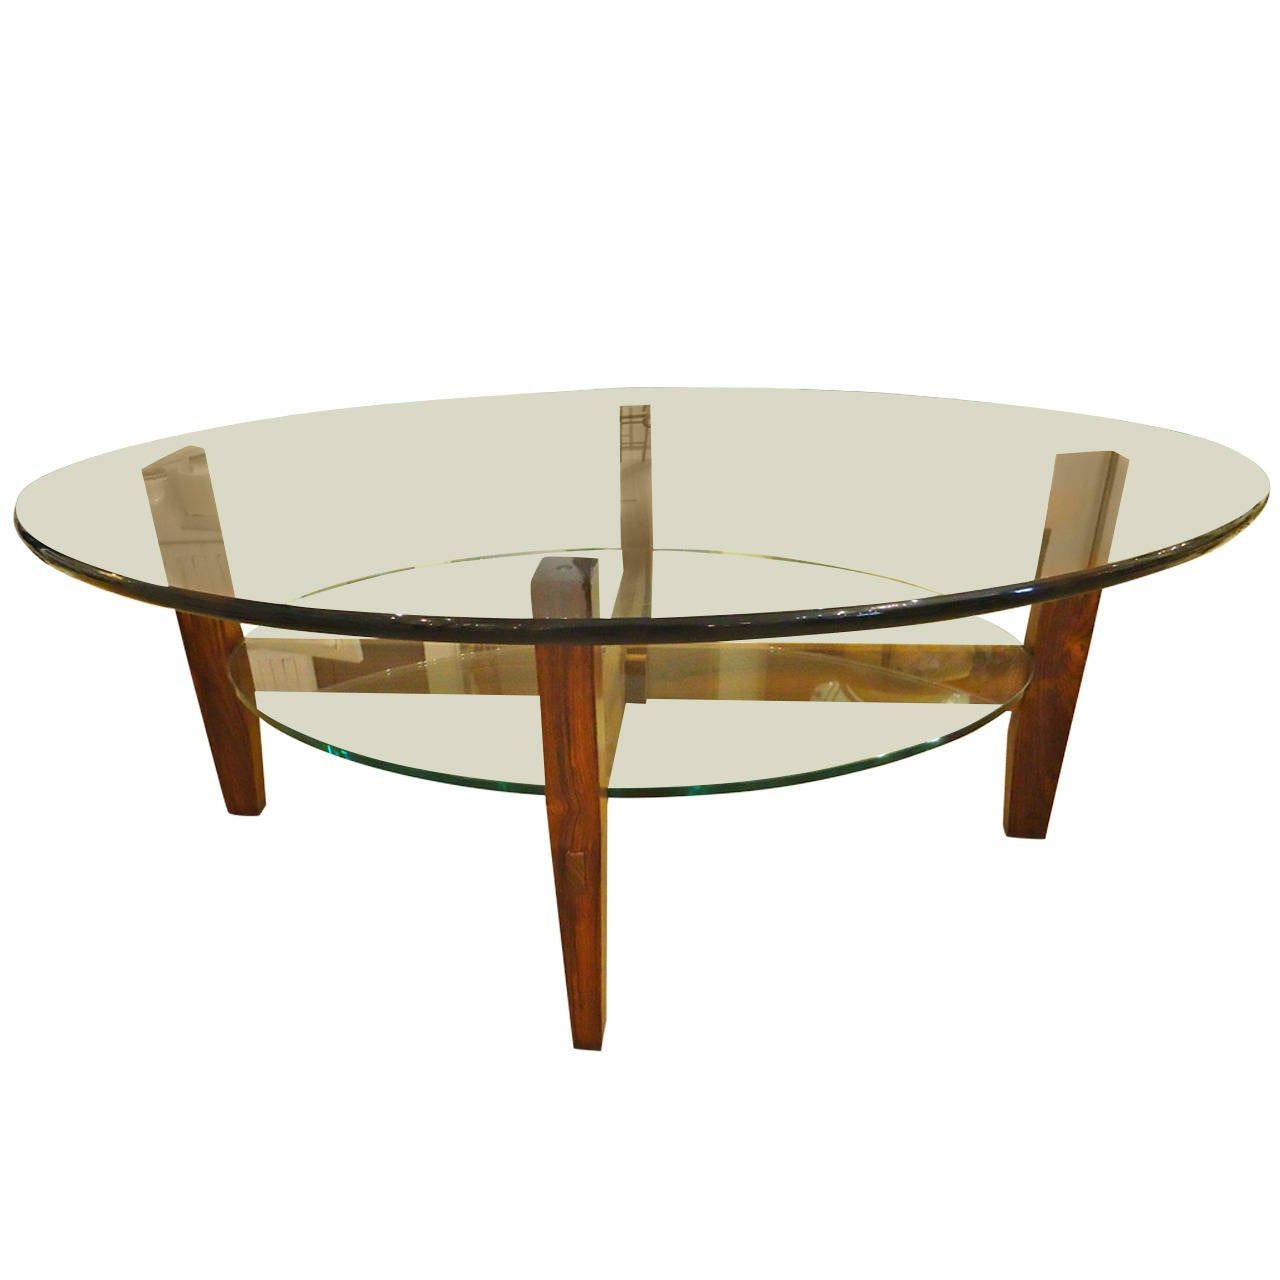 Two Tier Rosewood And Oval Glass Coffee Cocktail Table At Within Most Popular Glass And Pewter Oval Coffee Tables (Gallery 8 of 20)